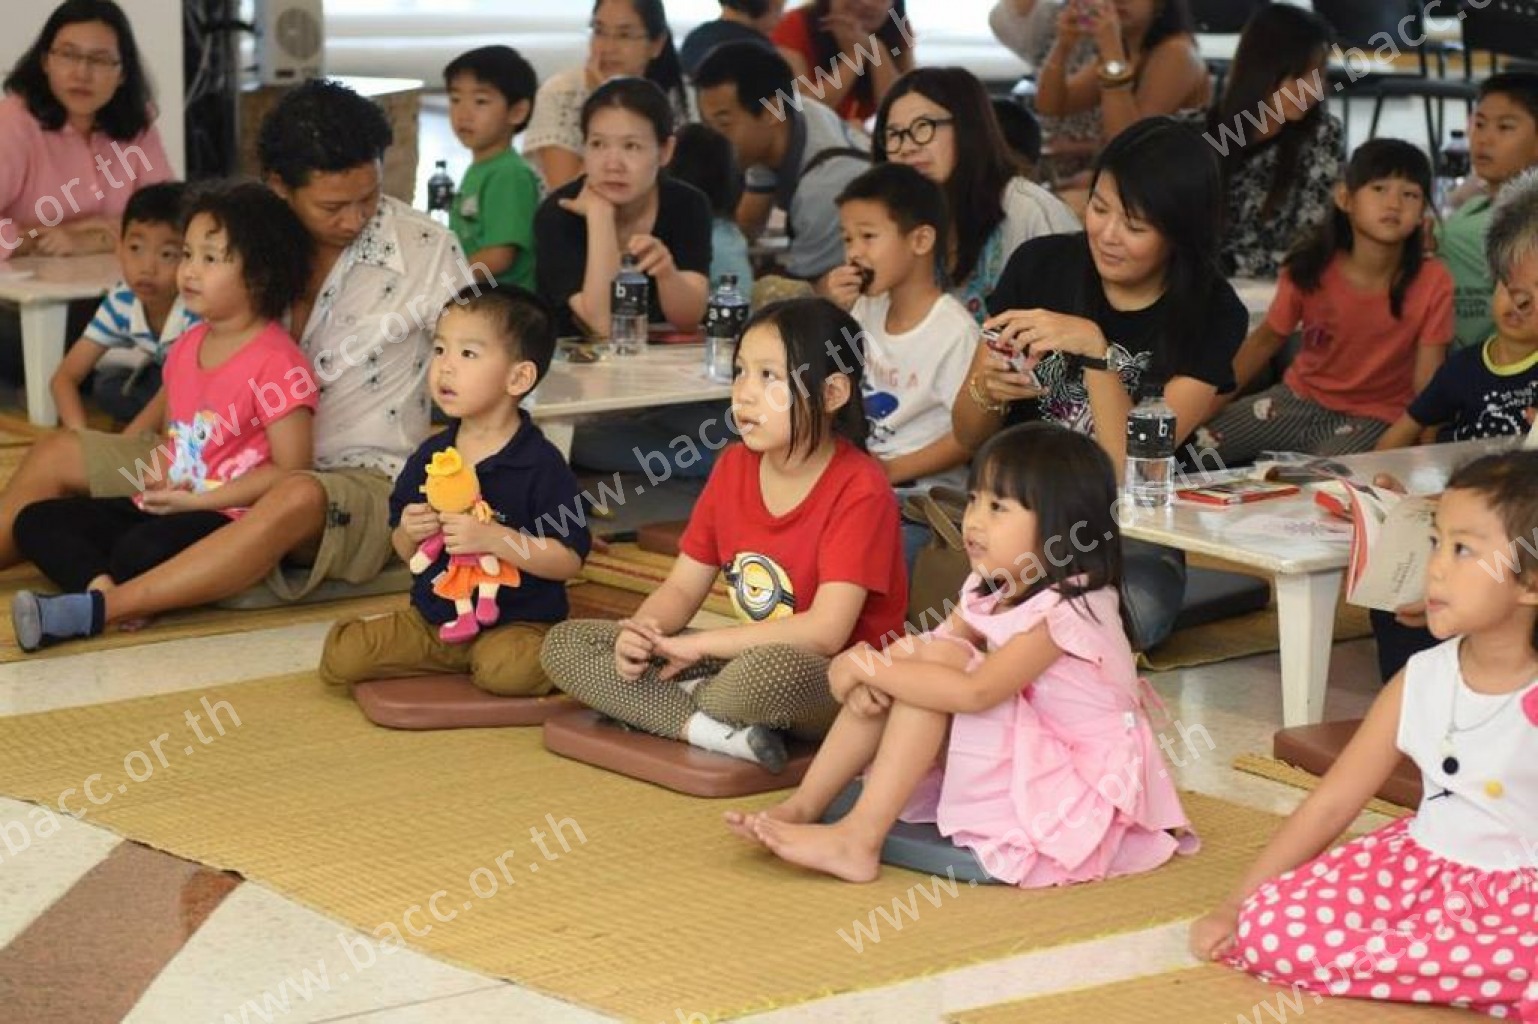 Storytelling Activity for Kids “The Power of the Sweets”